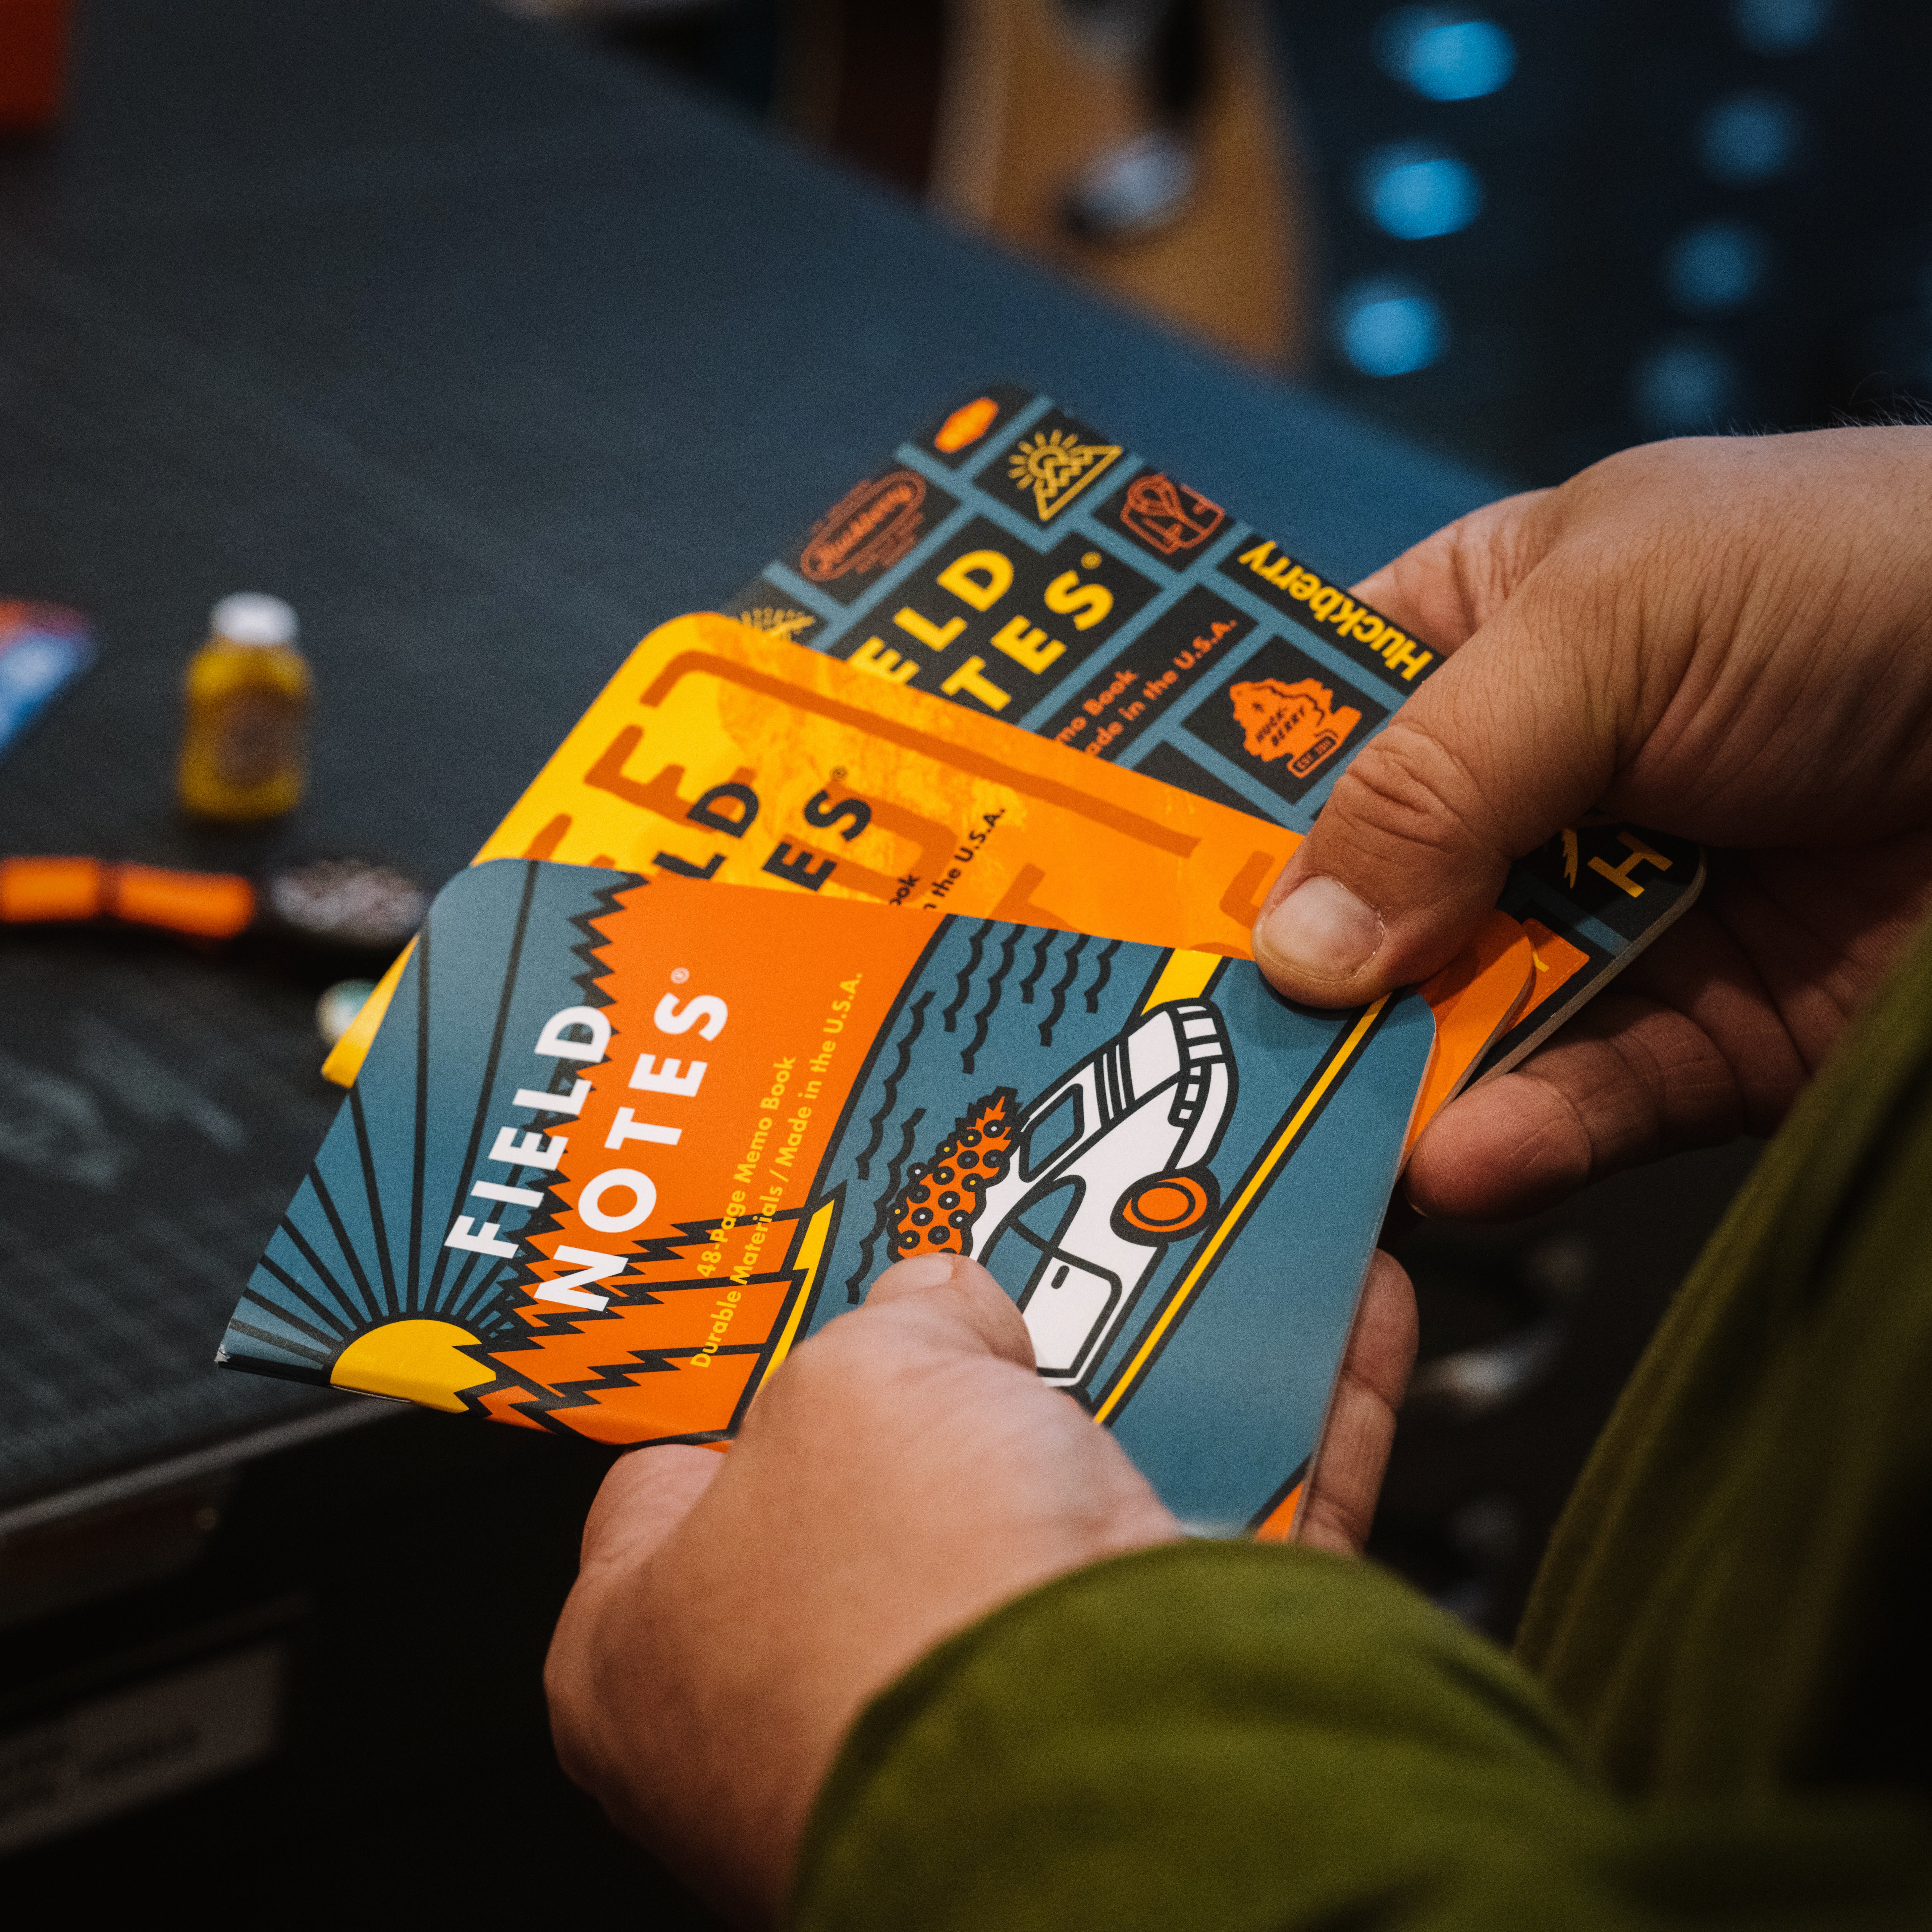 Field Notes | Huckberry x Draplin for Field Notes 3-Pack | 3 Pack | Size: One Size | Audio and Tech | Everyday Carry